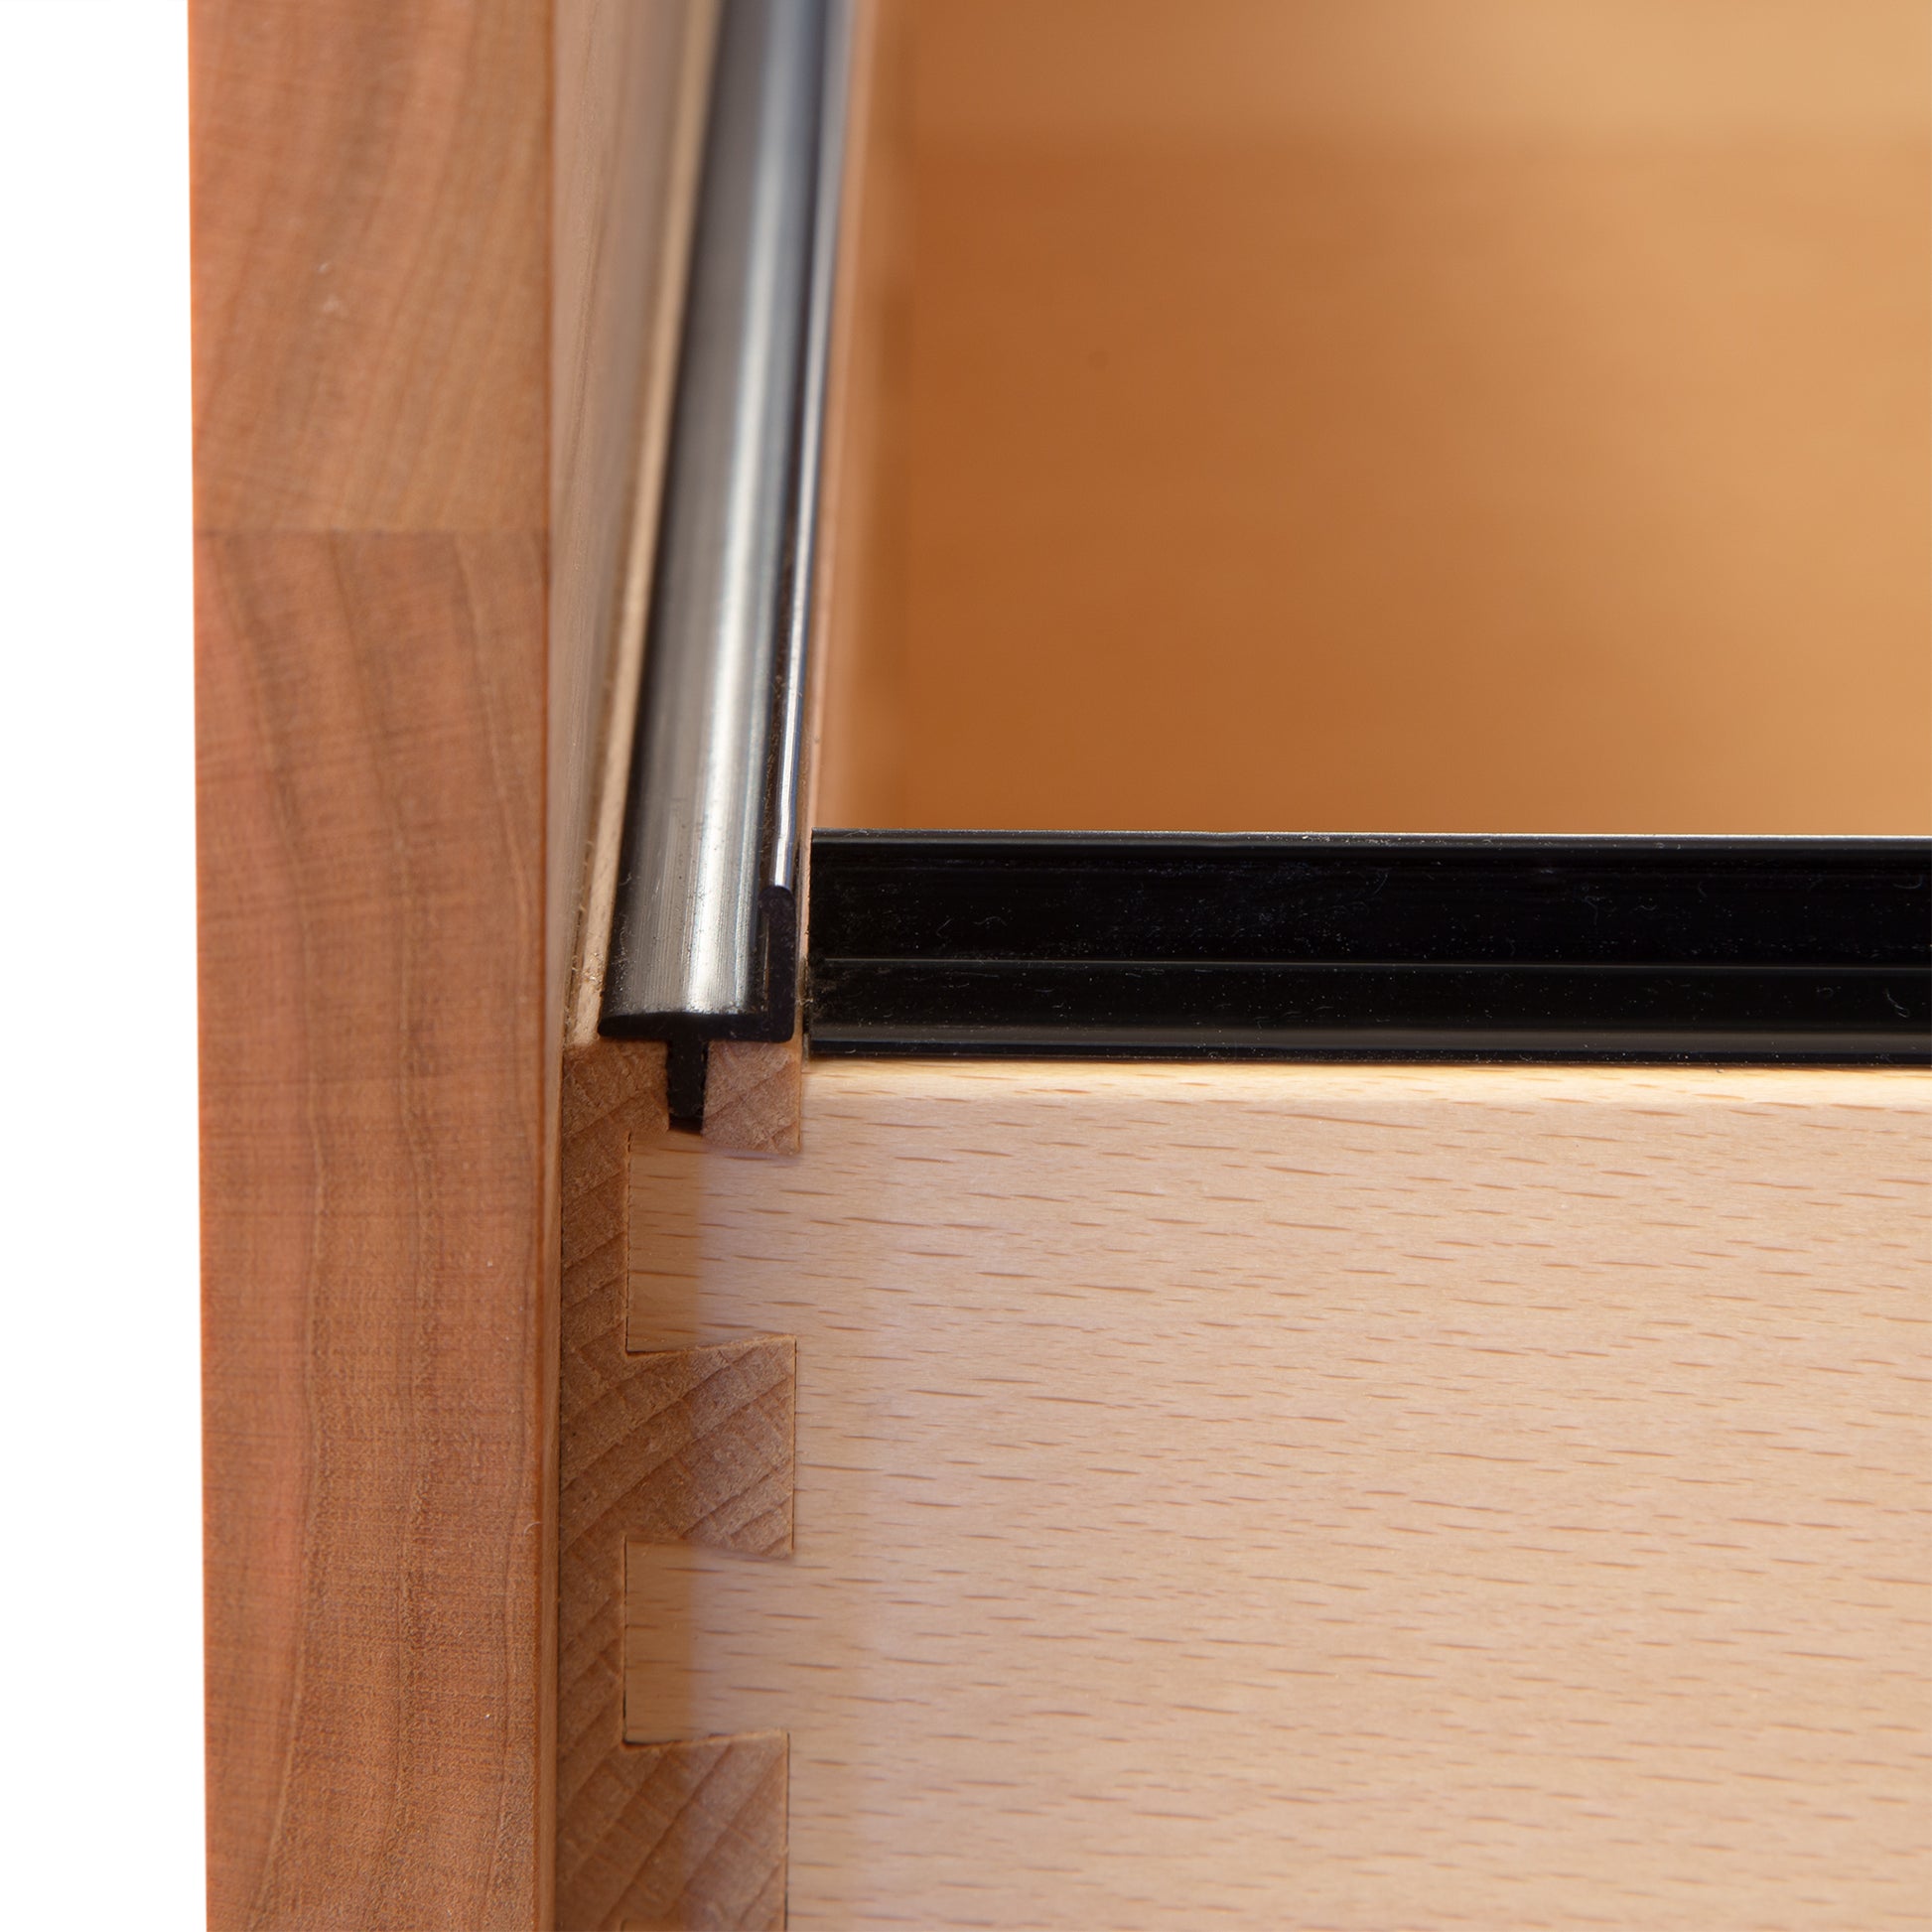 Close-up of a wooden drawer with dovetail joints, featuring a metal drawer slide and partial view of the Vermont Furniture Designs Heartwood Shaker Vertical File Cabinet's interior.